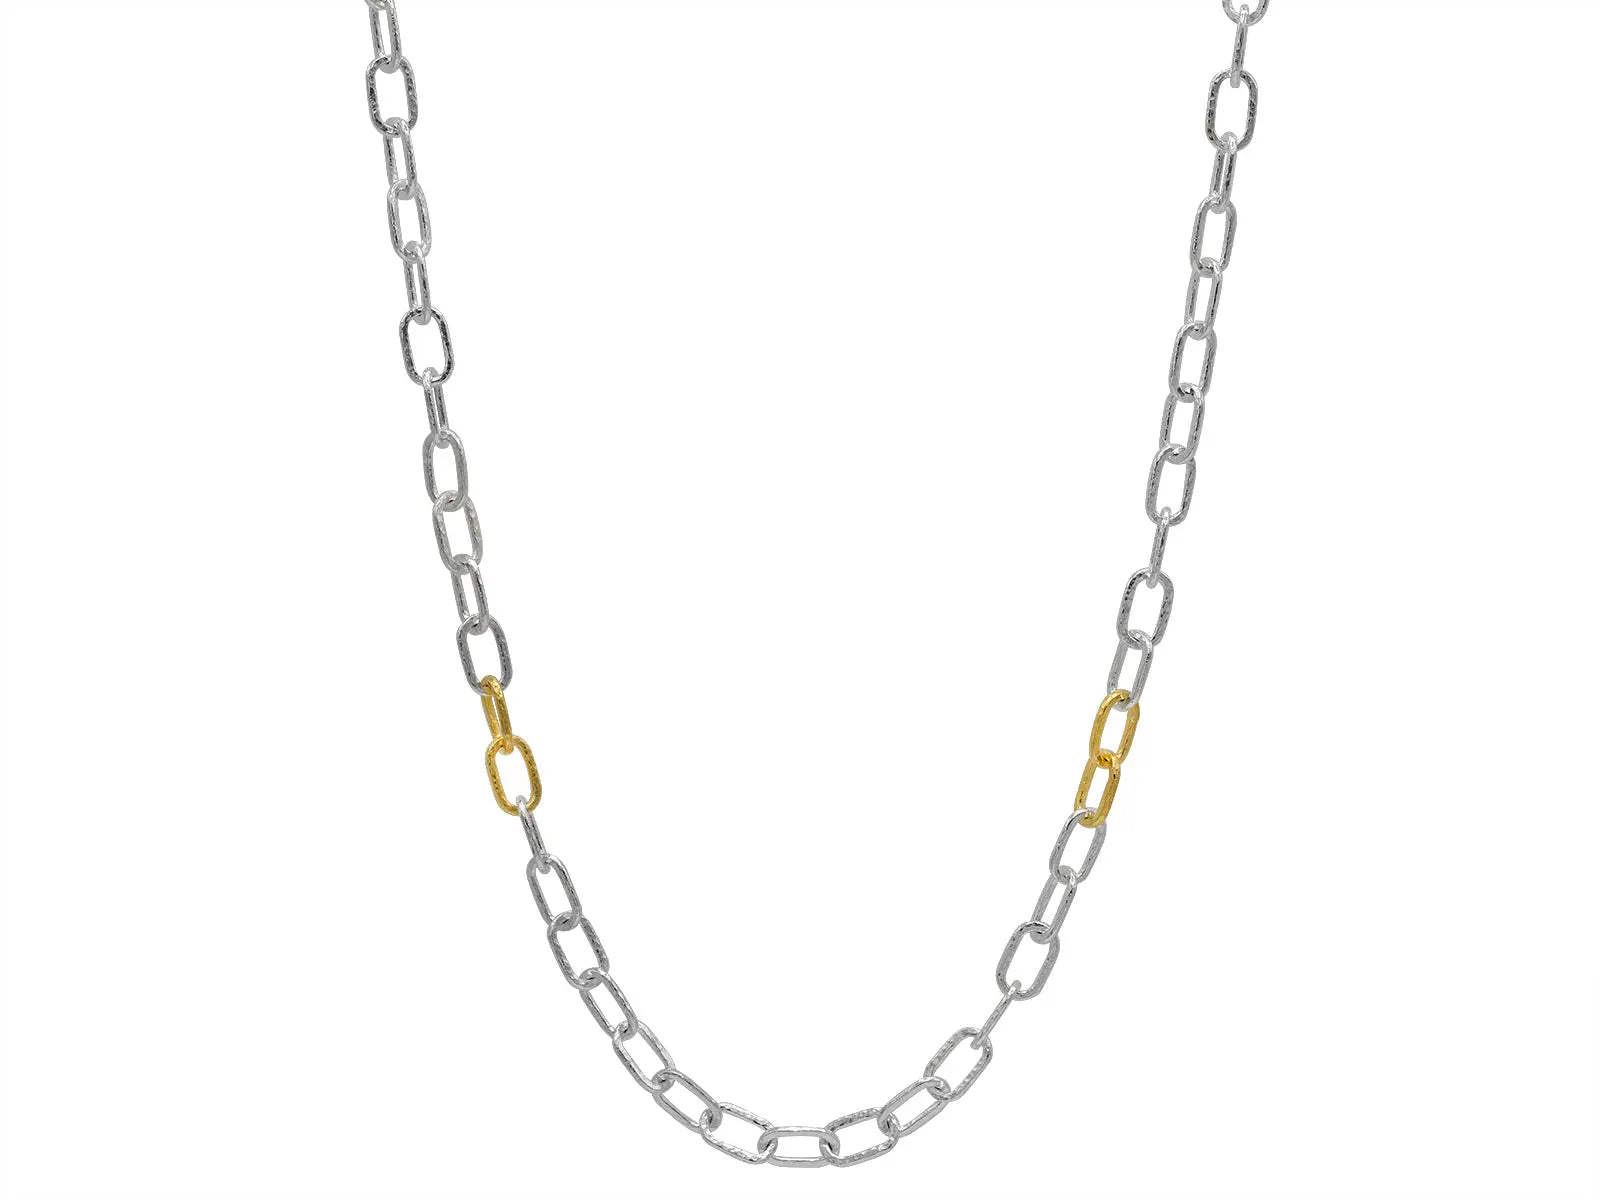 The chain necklace is in sterling silver plated with 24K gold. The length  18" with a lobster clasp.  Designed by Gurhan